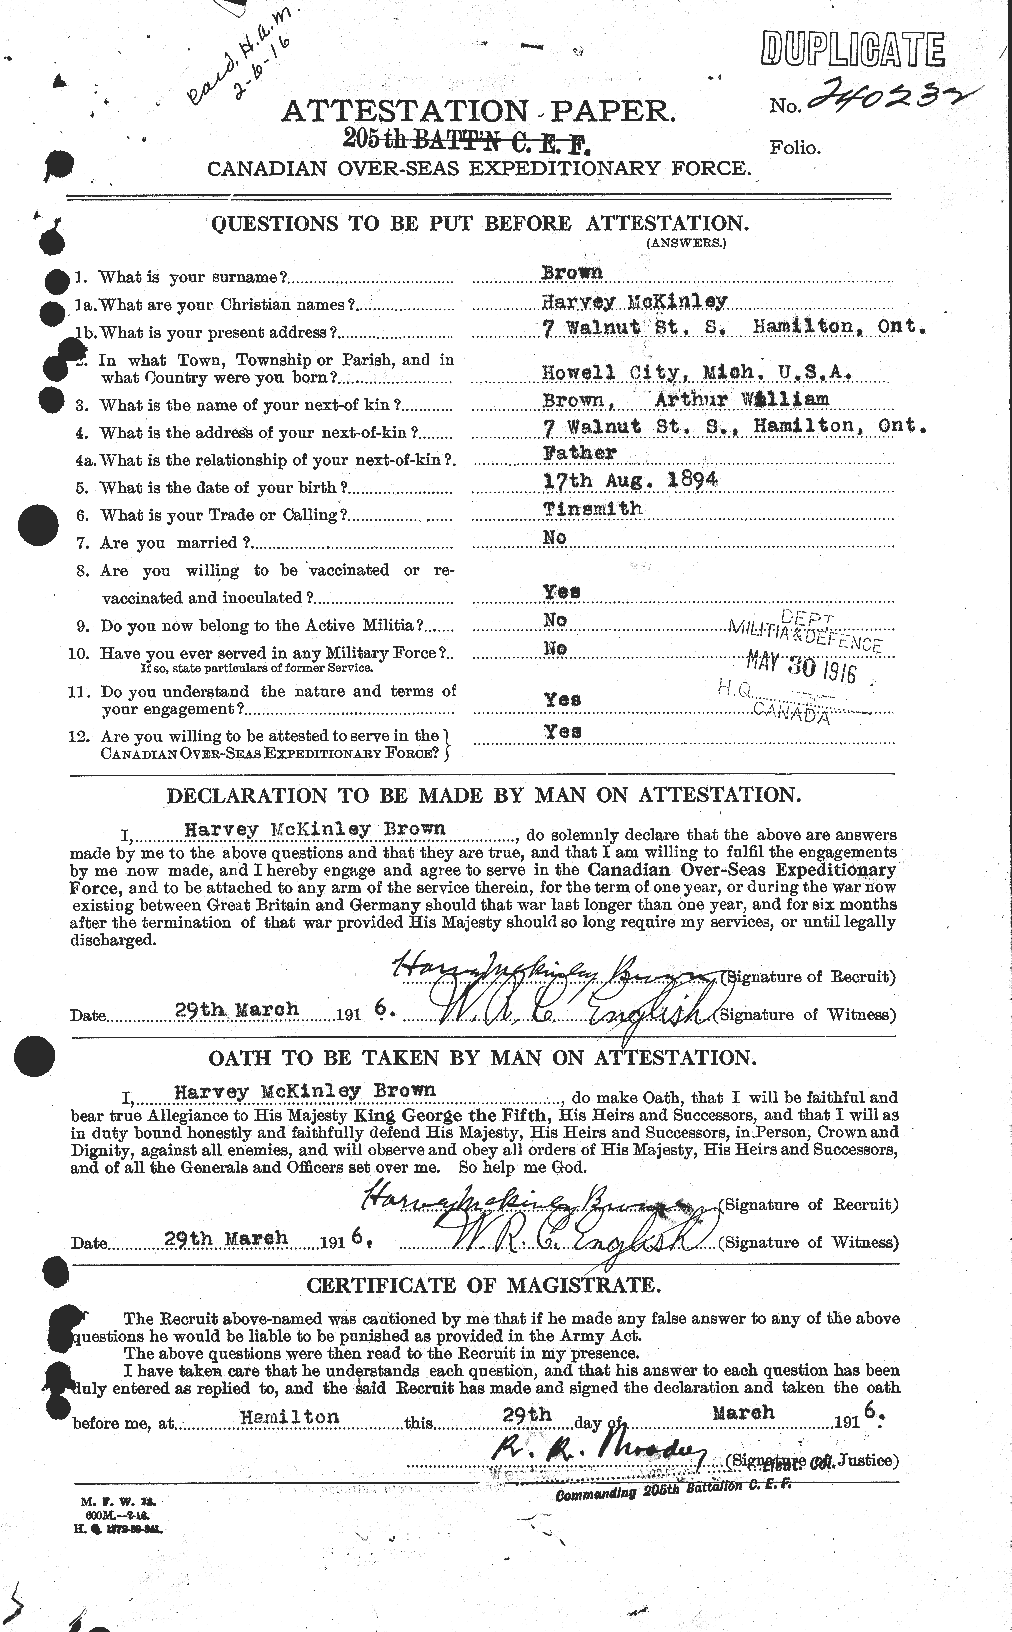 Personnel Records of the First World War - CEF 265489a